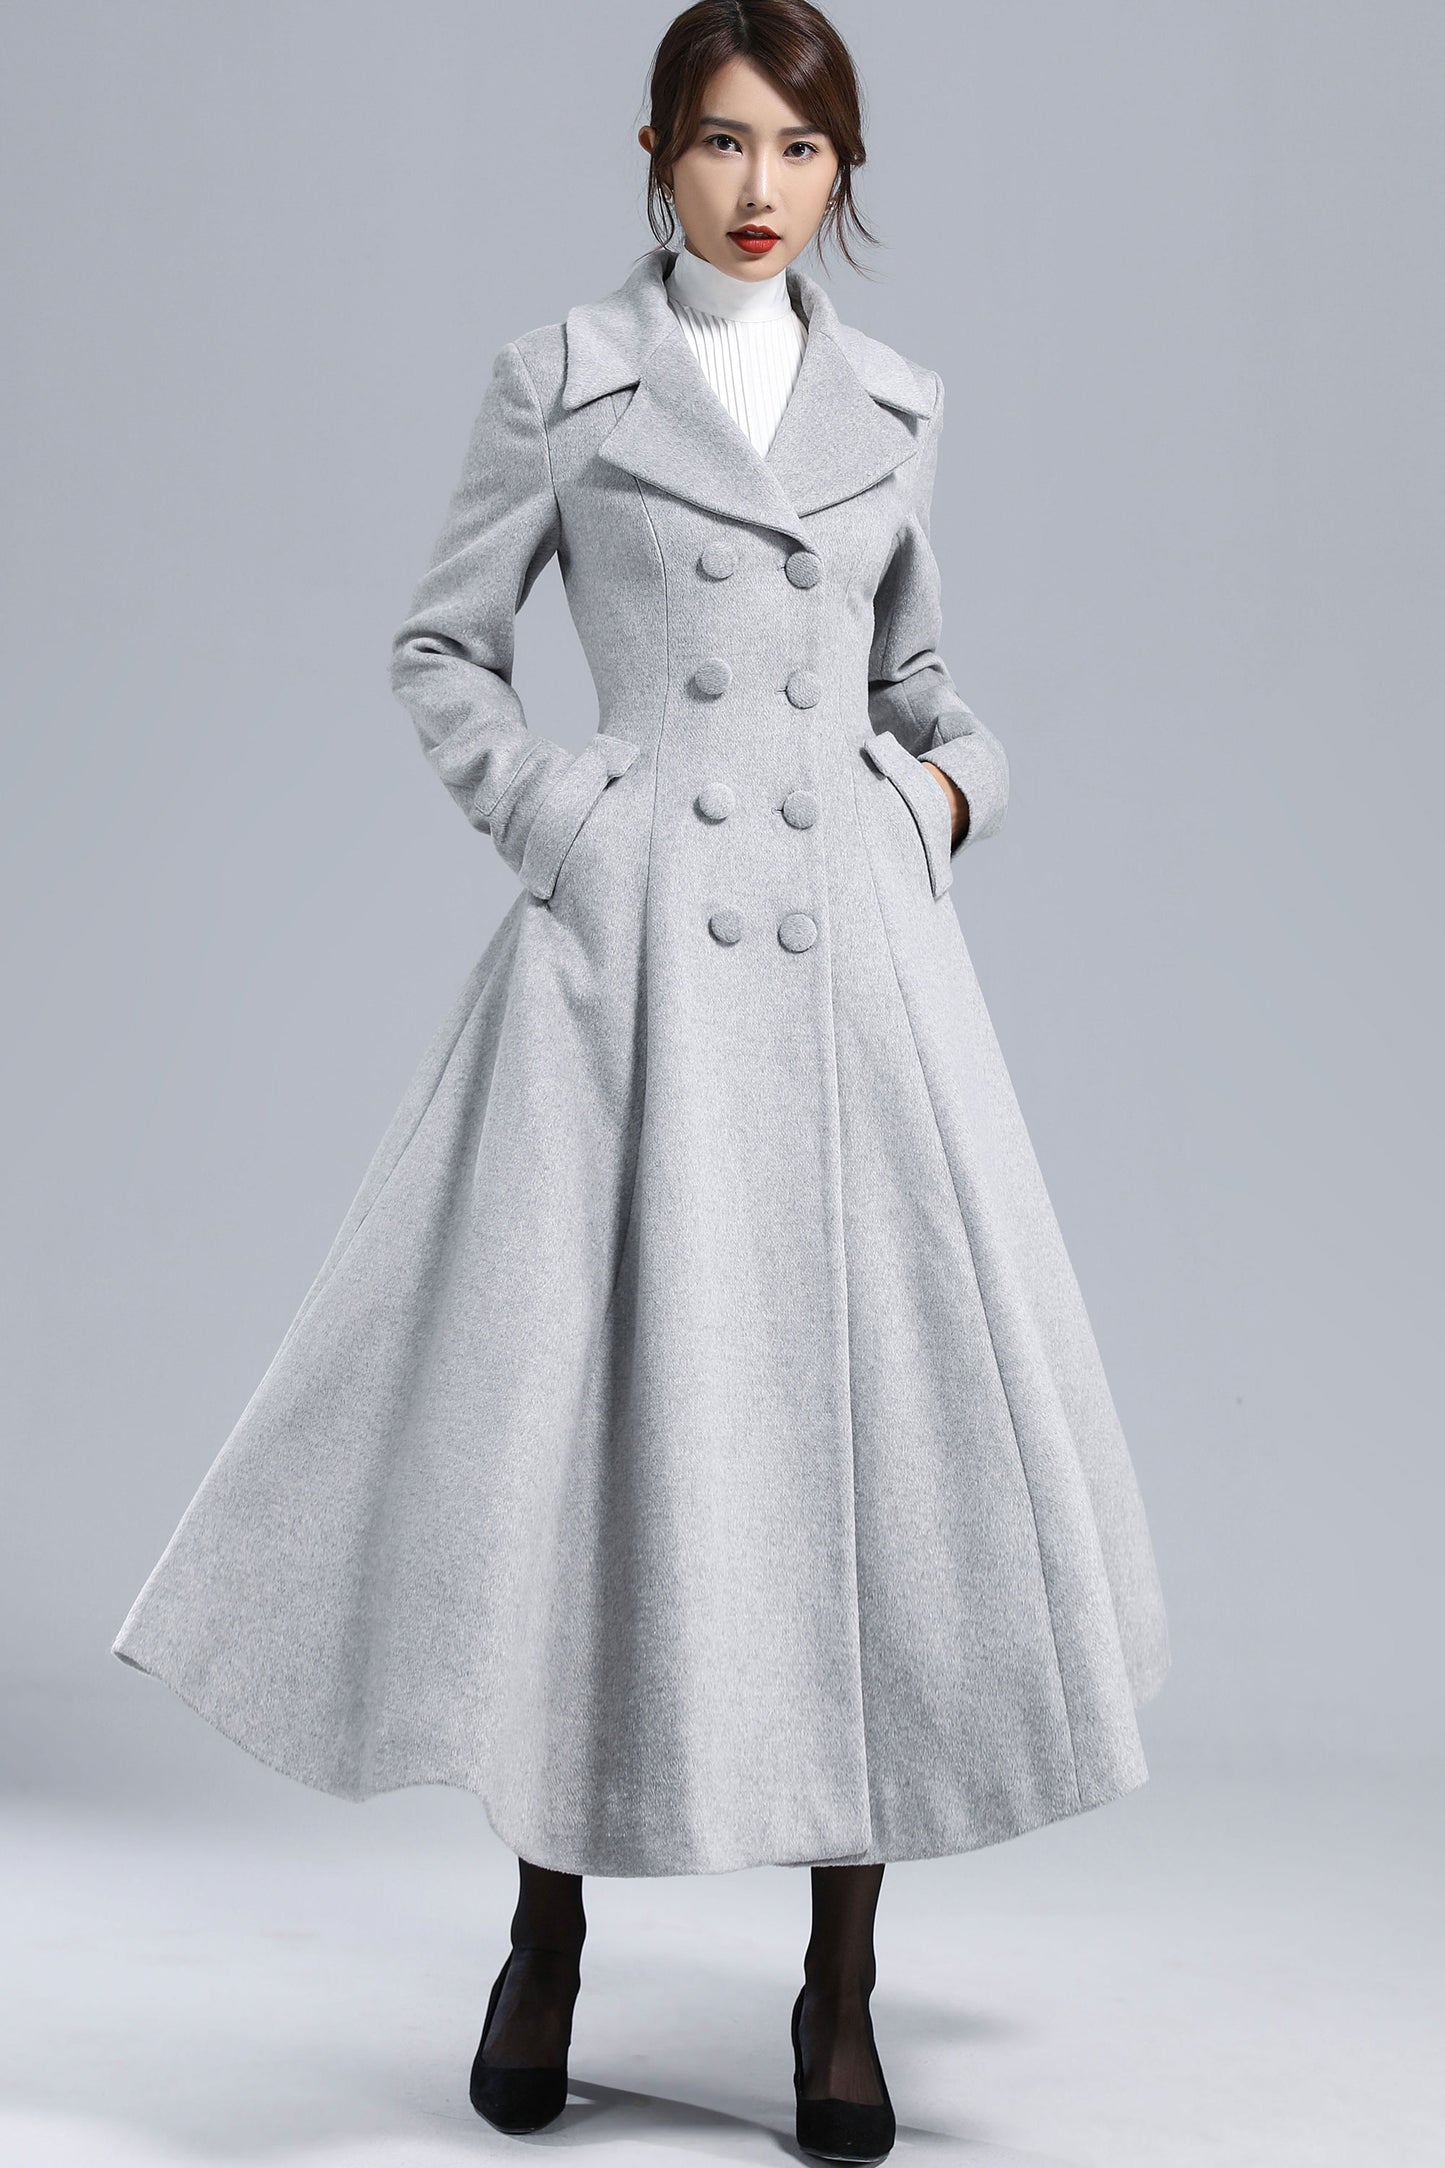 Vintage Inspired Double Breasted Coat 3236